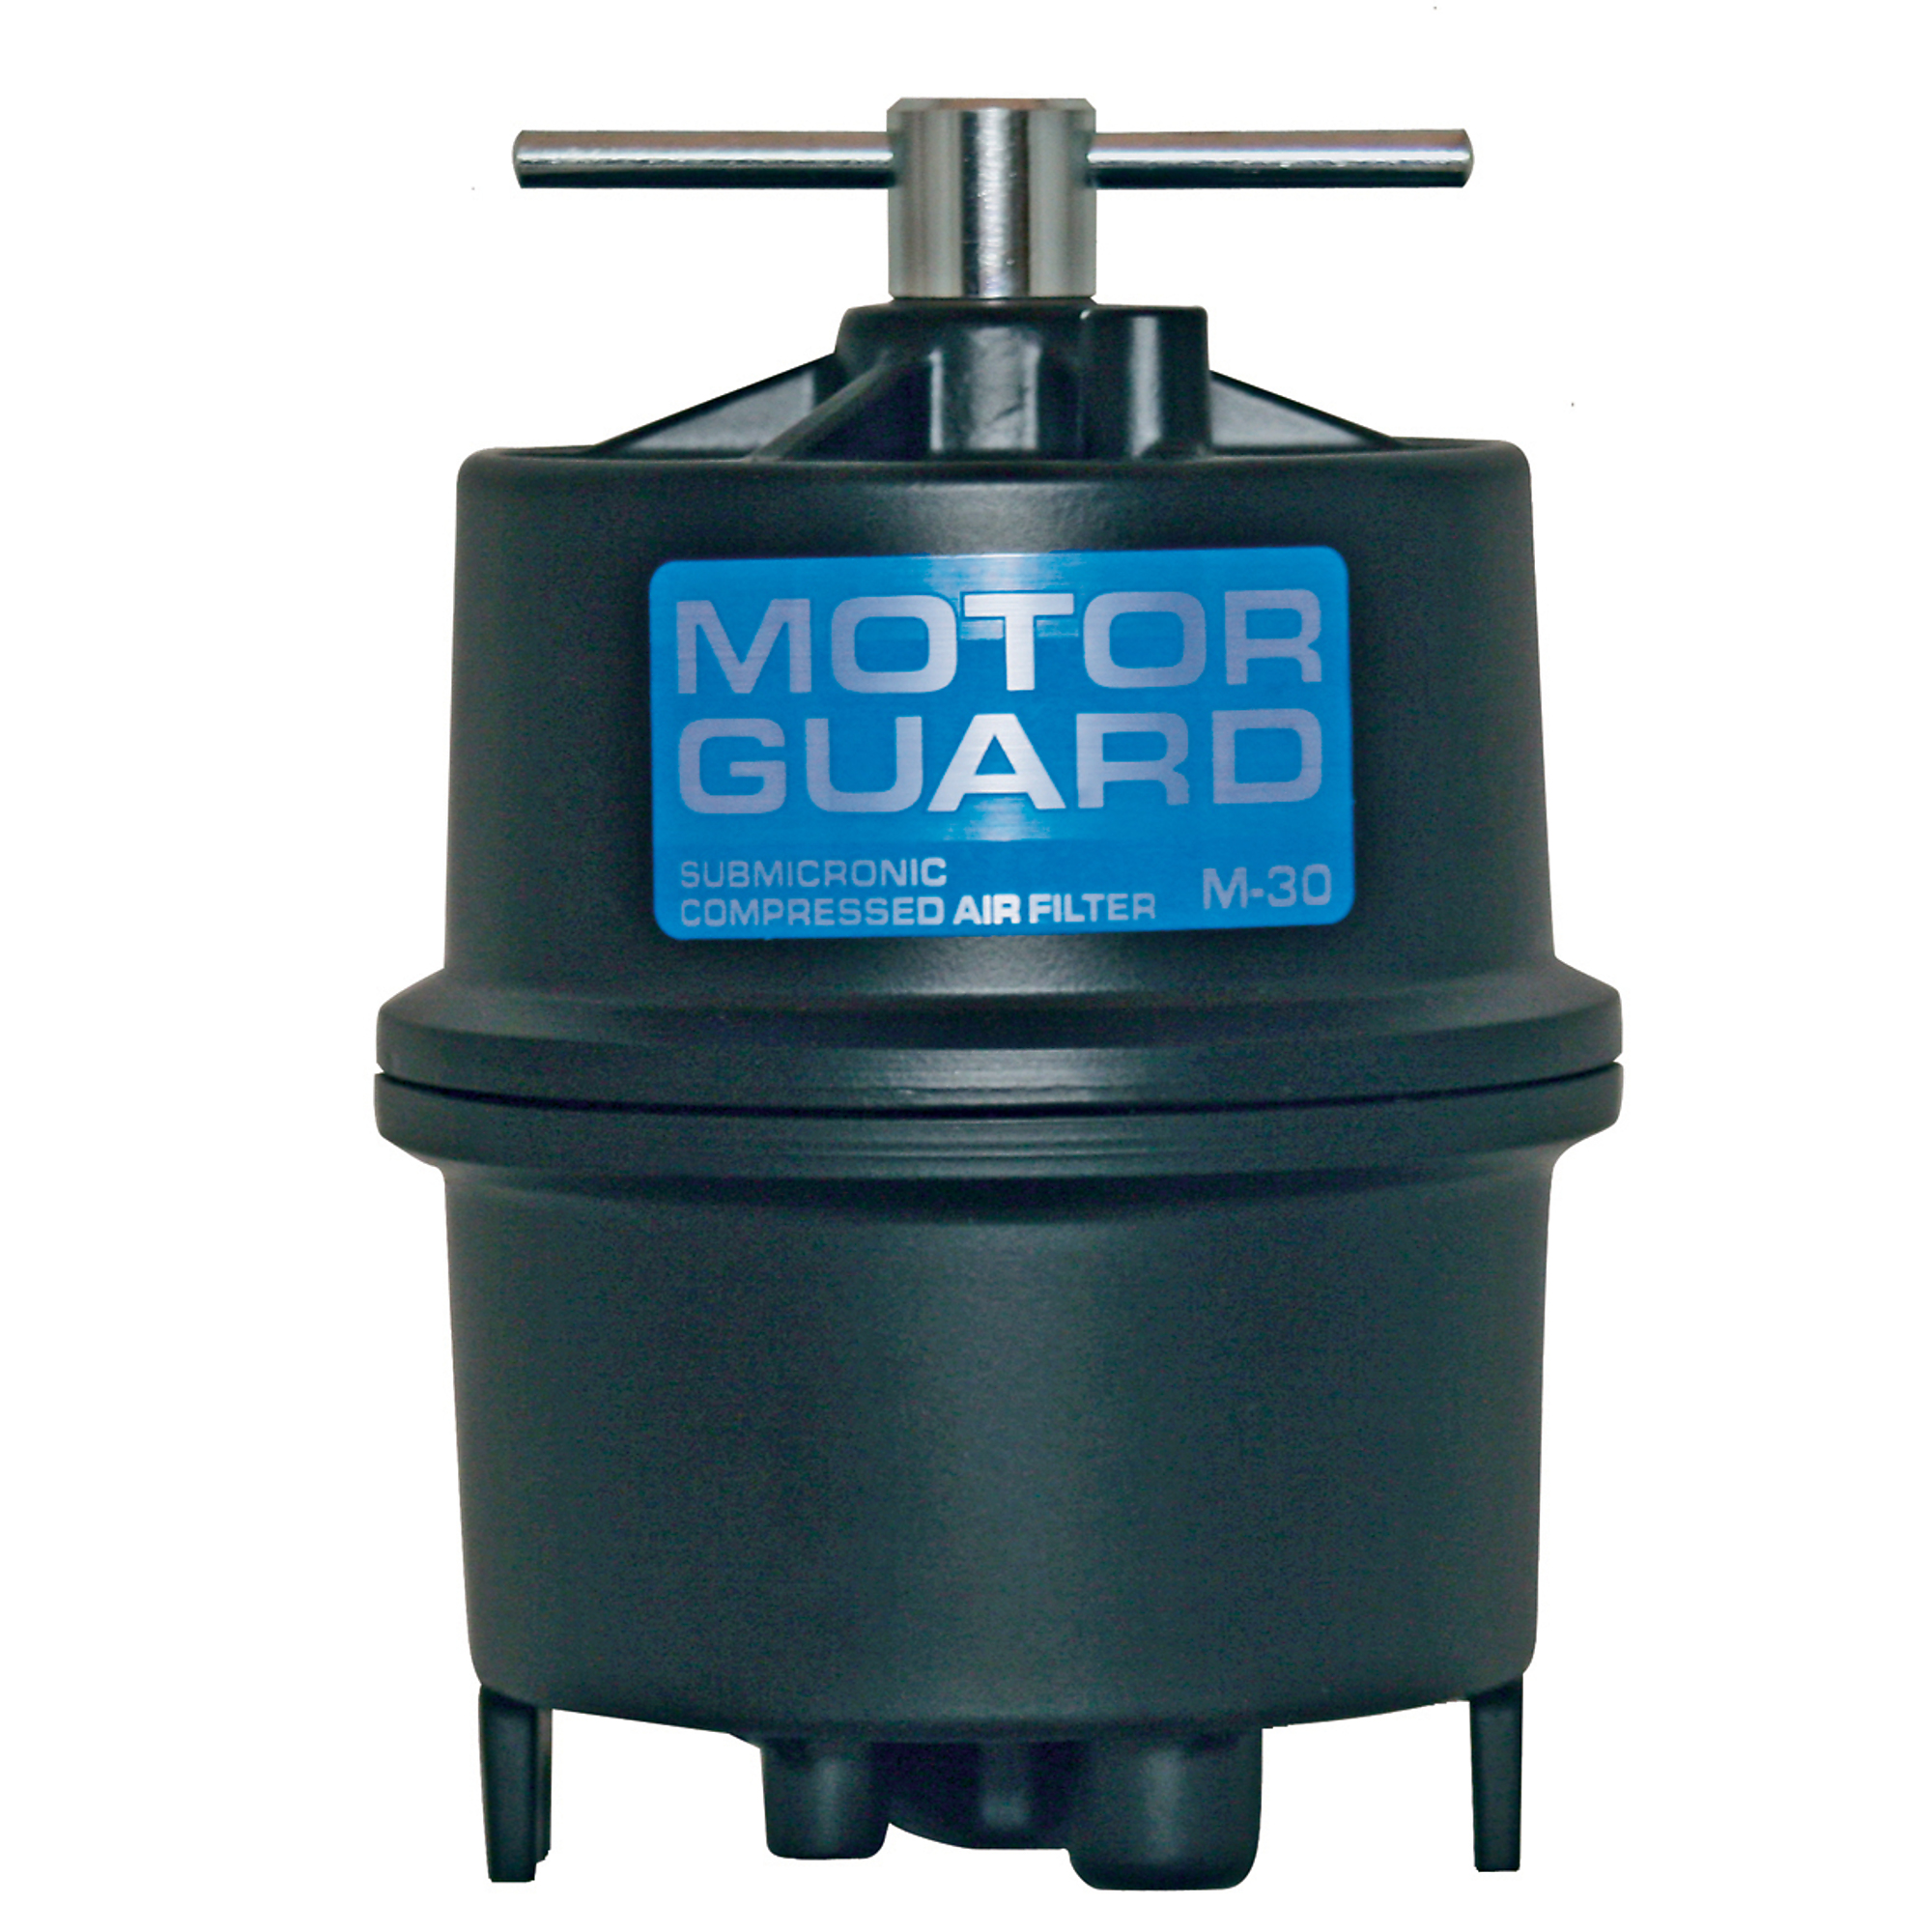 Motor Guard, Submicronic Compressed Air Filter 1/4 NPT, Model M-30